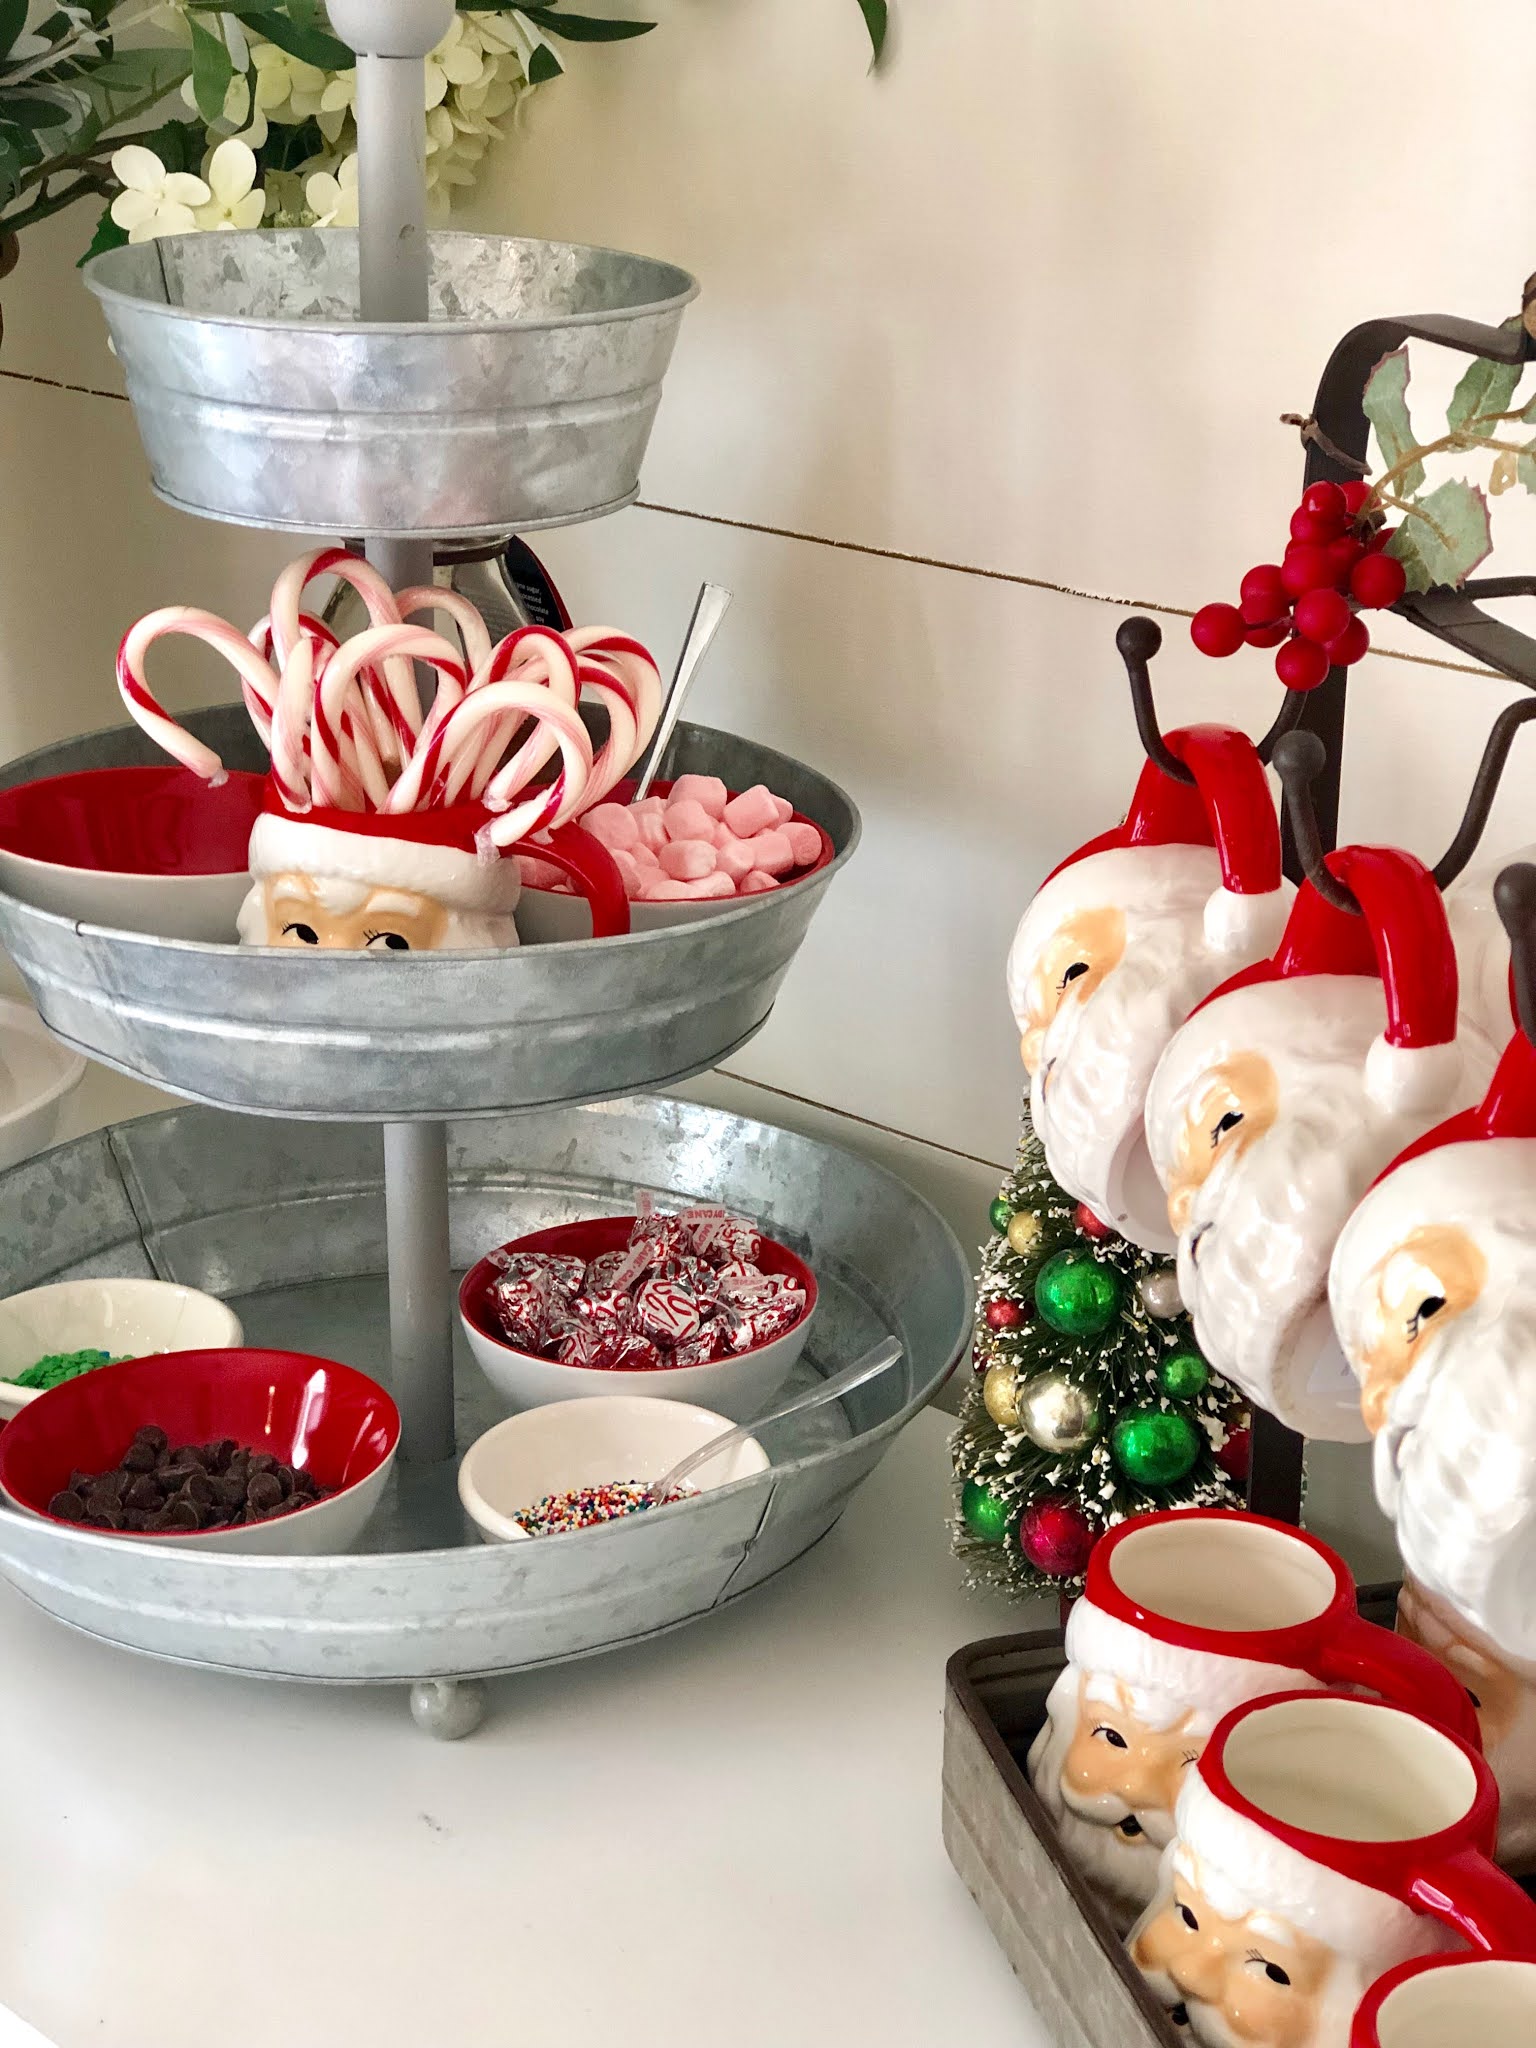 Ginger Snap Crafts: 15 Christmas Ideas